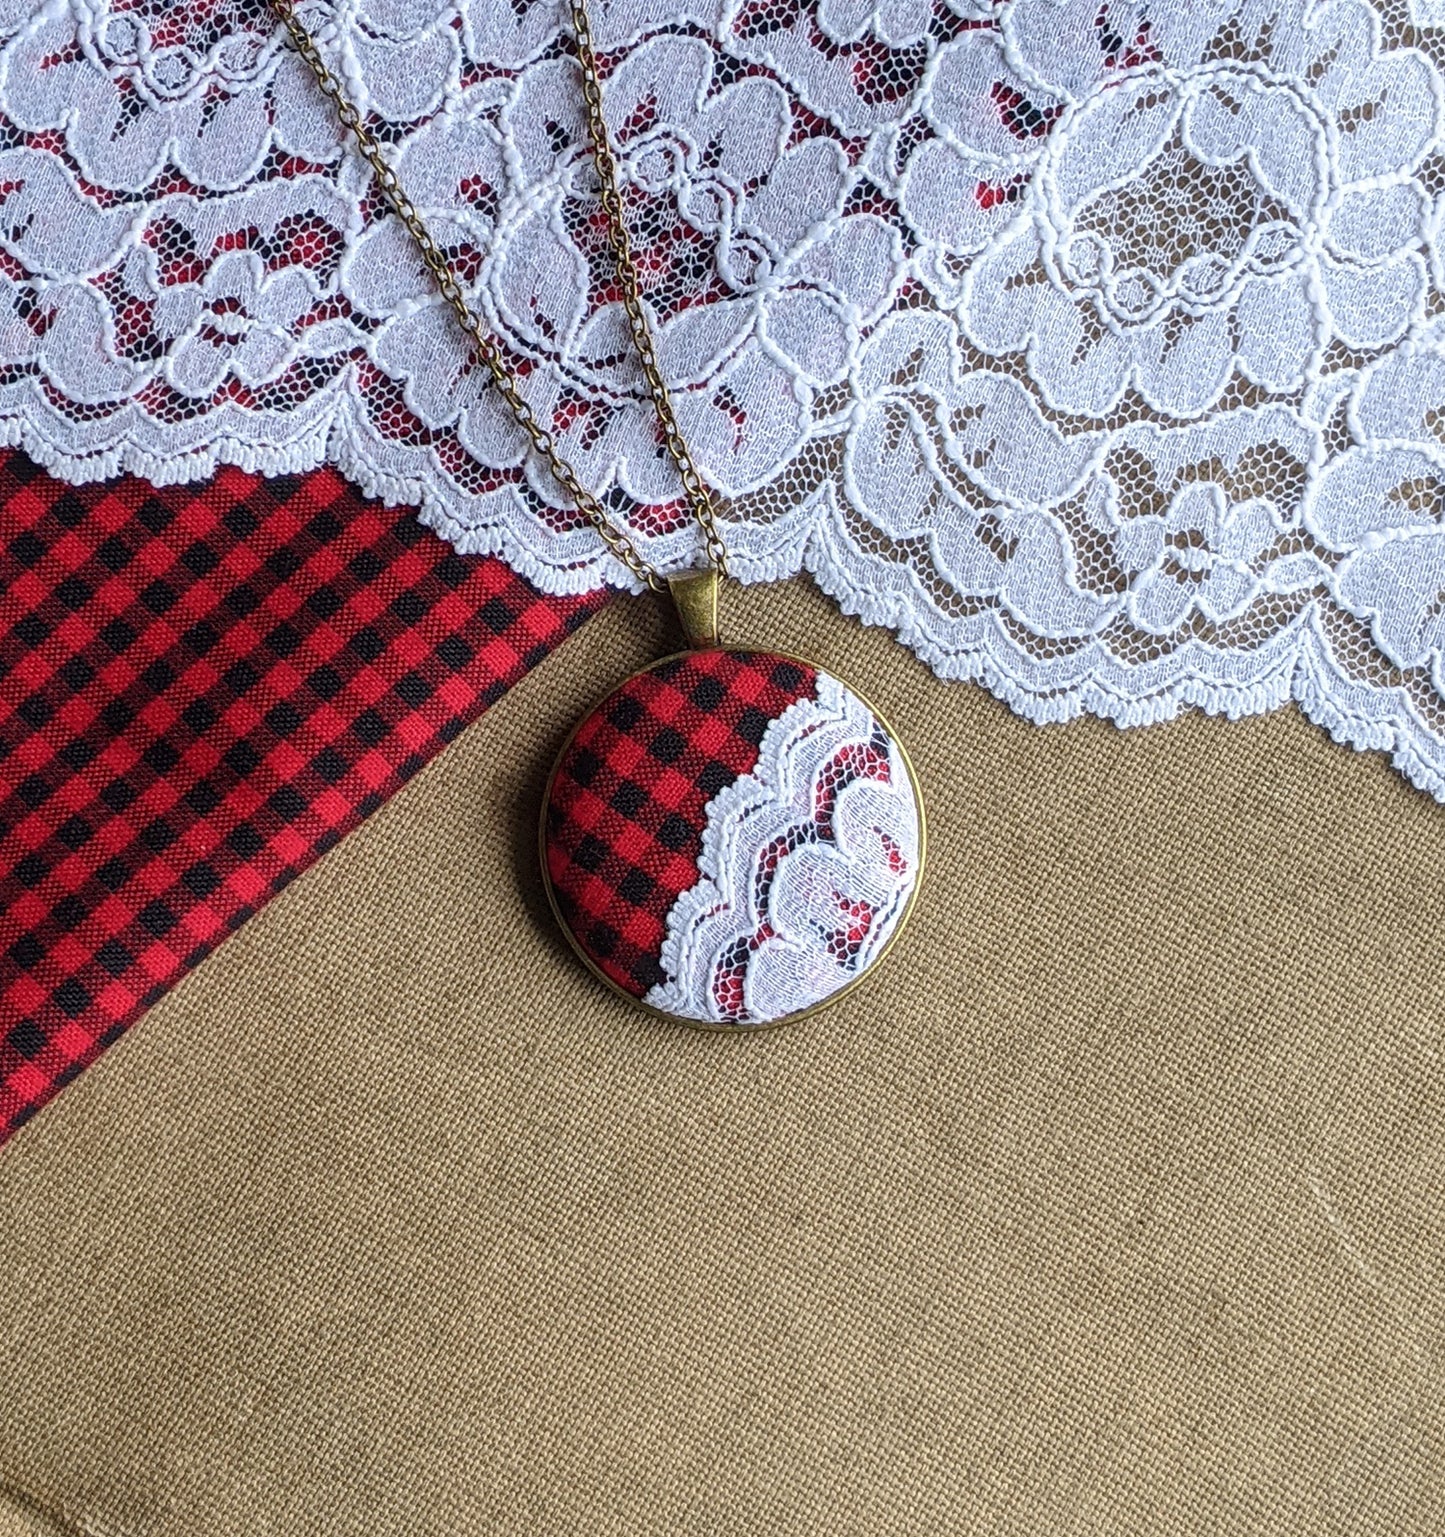 Buffalo Plaid Fabric Necklace With Lace, Red, Black, White